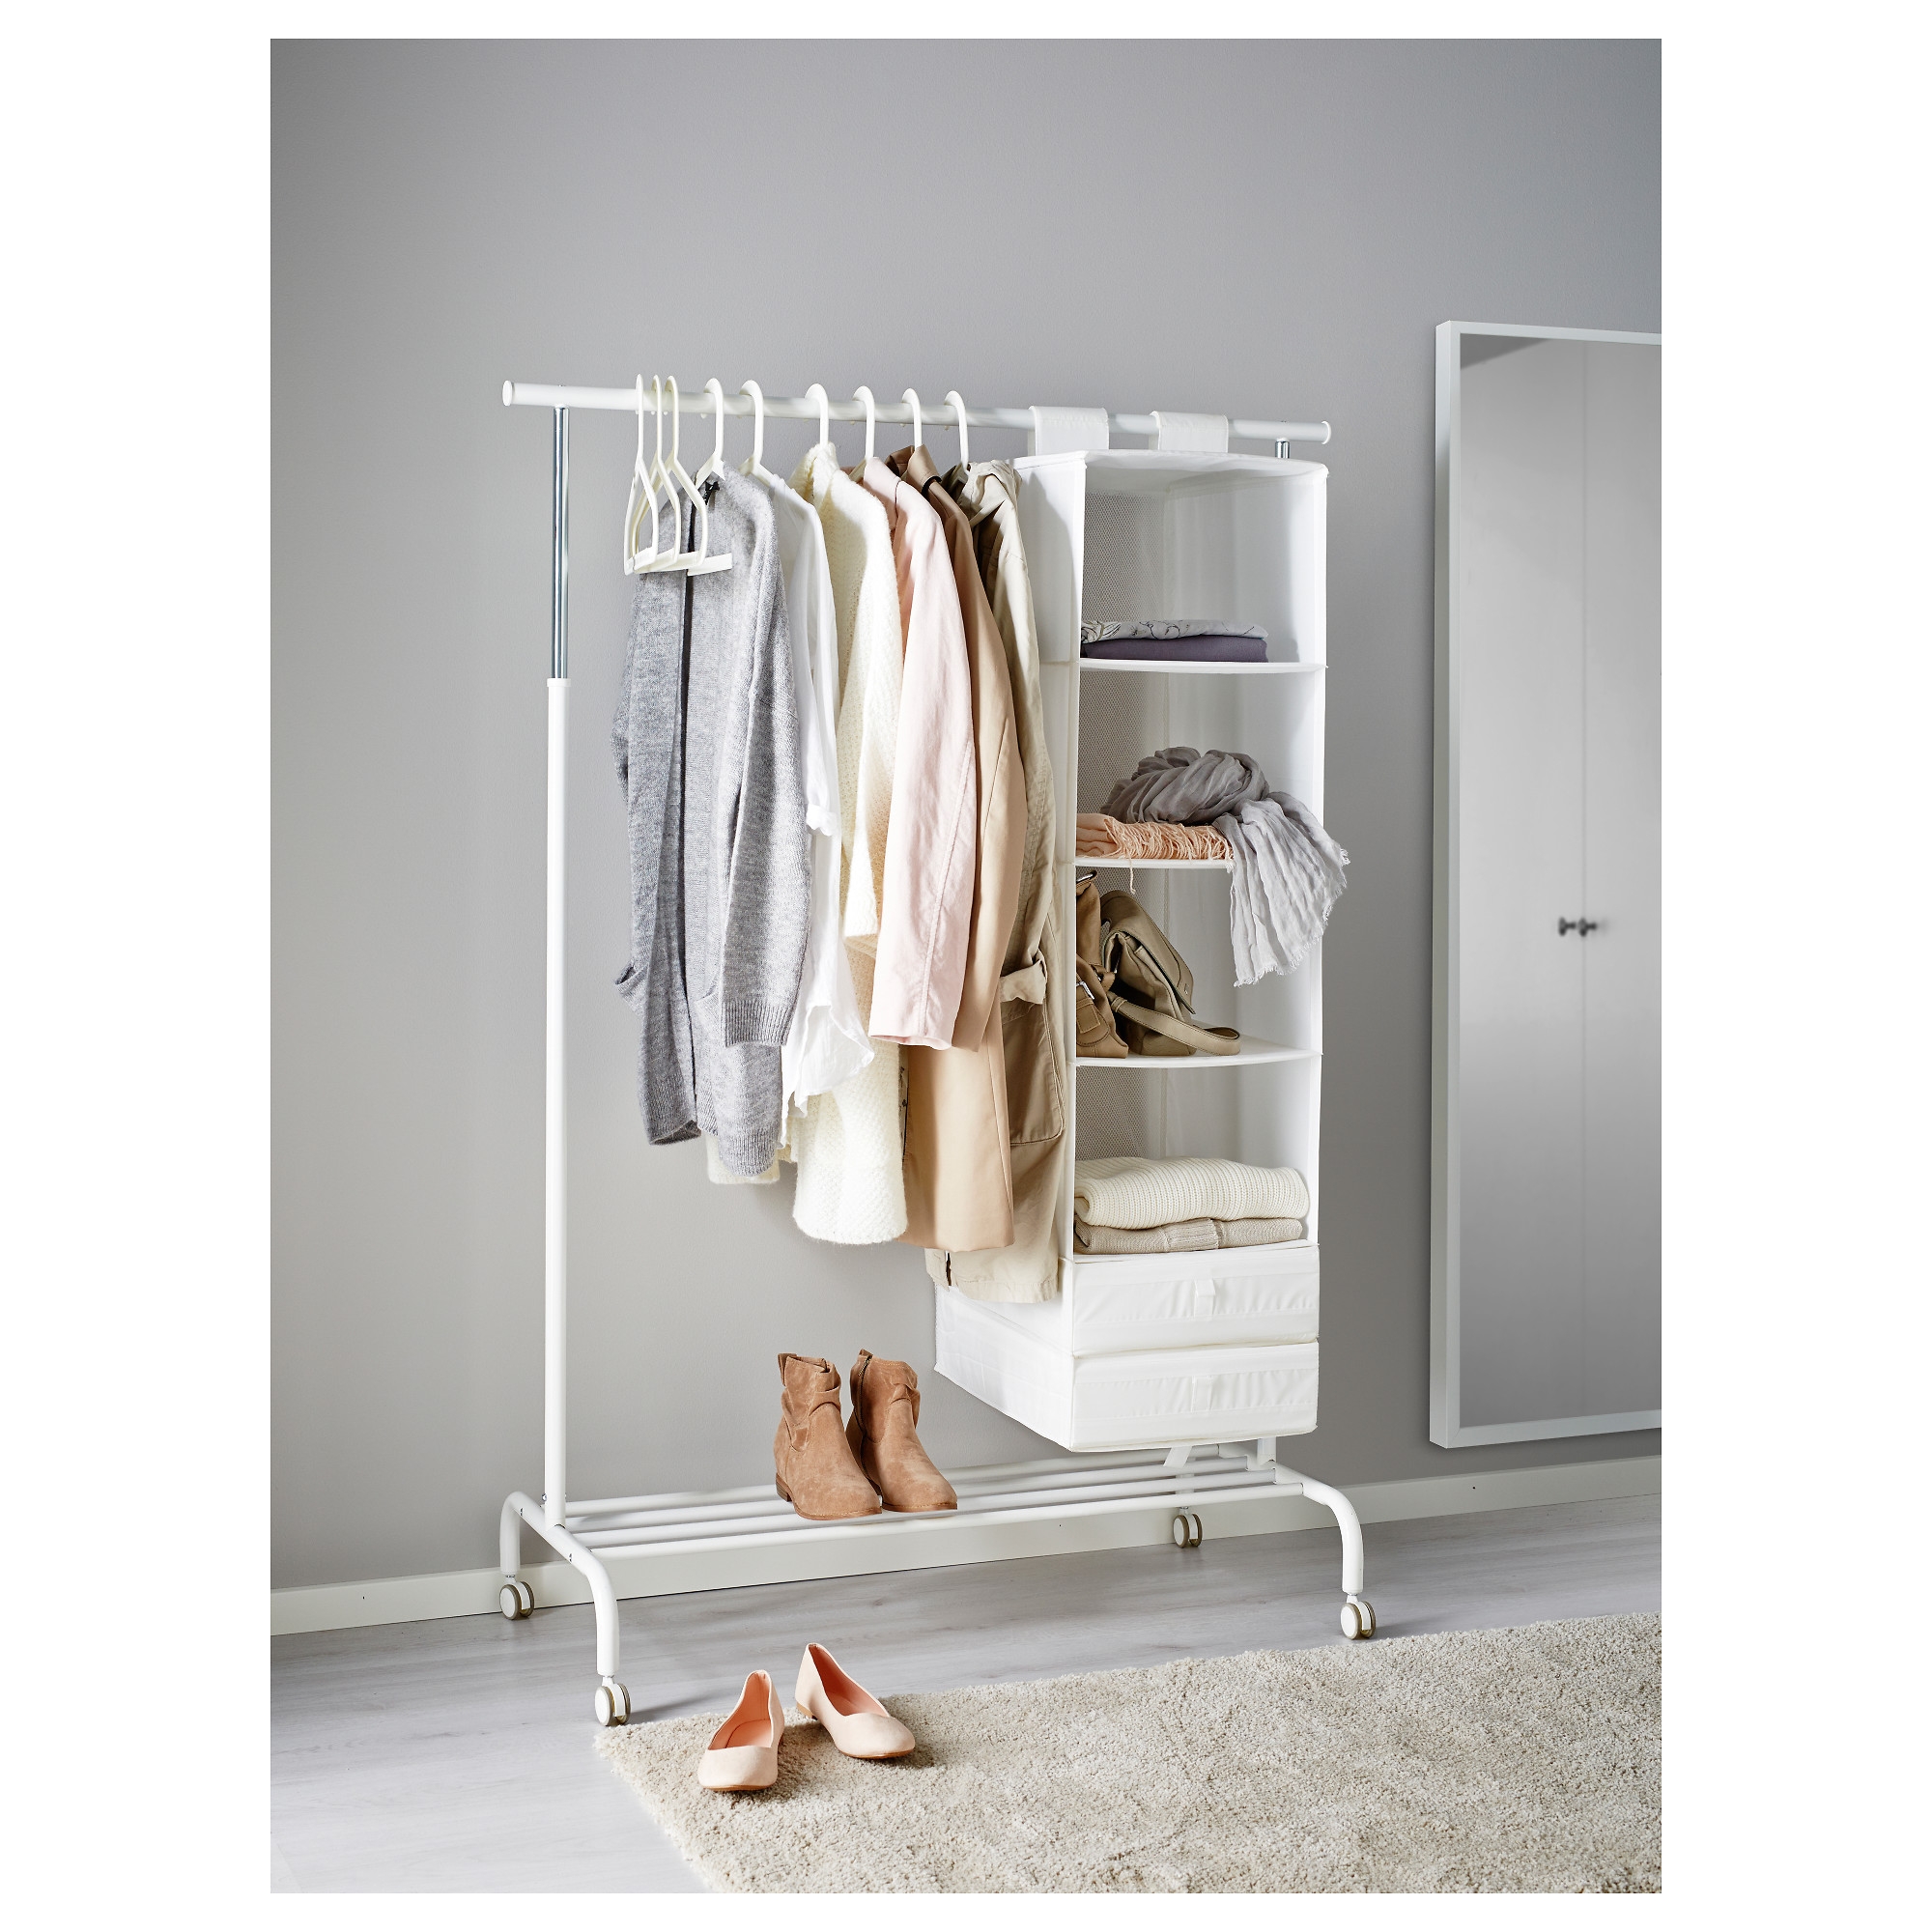 Ikea Clothing Rack Canada Interesting Home Decorating Trends Homedit Ways to Hack Ikea Spice